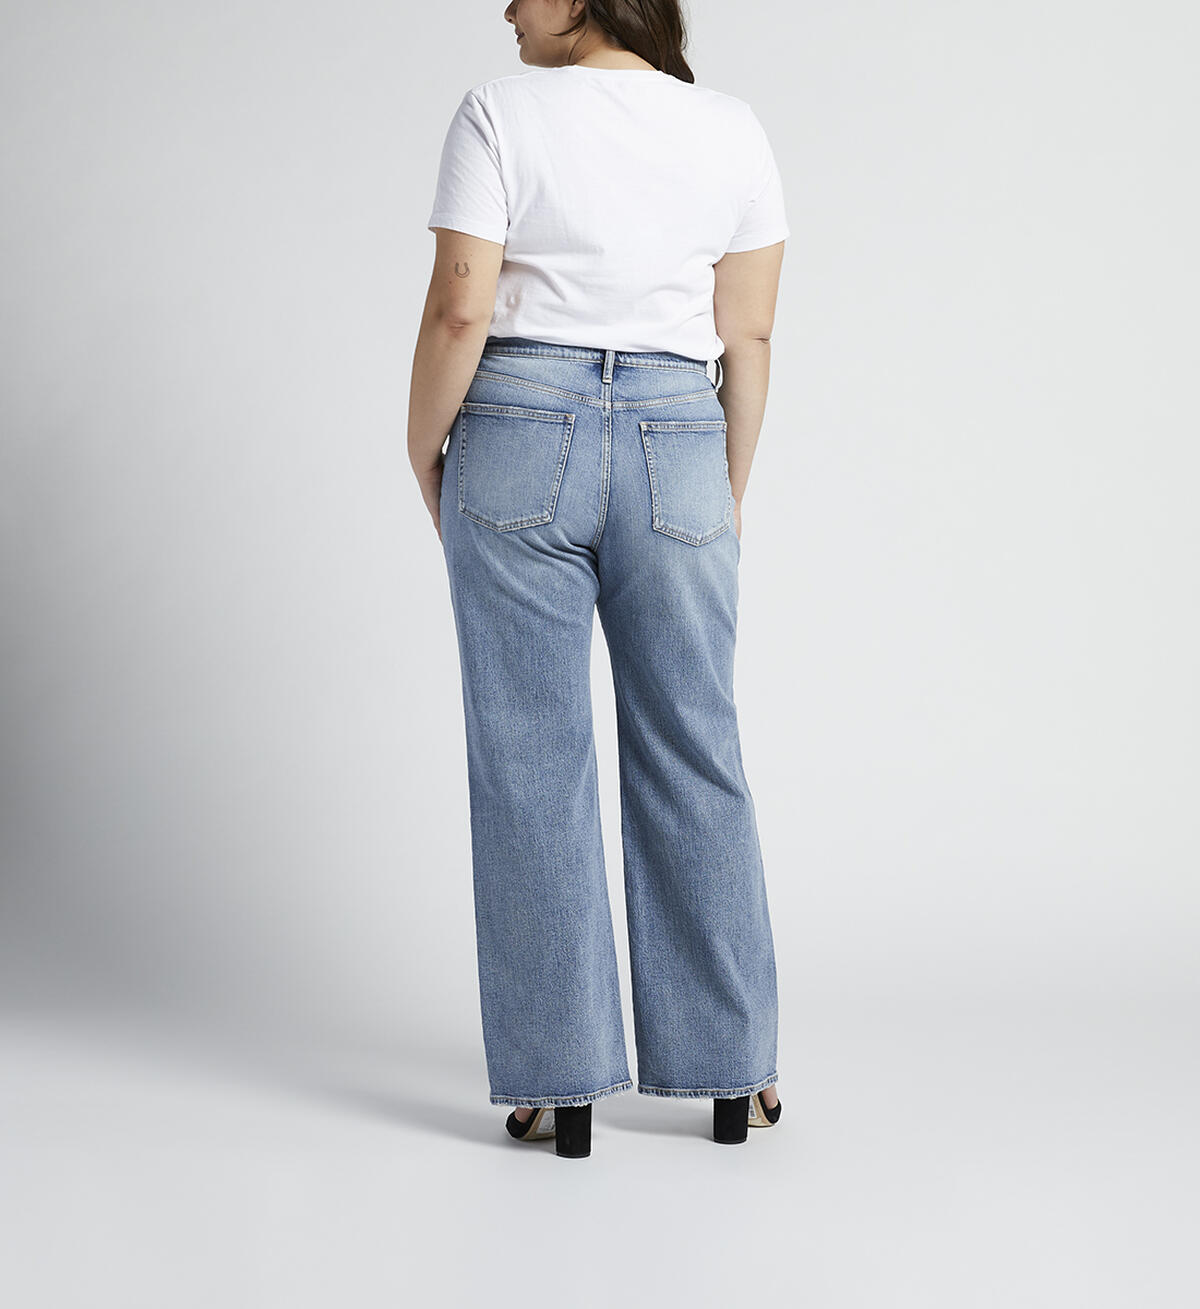 Highly Desirable High Rise Trouser Leg Jeans Plus Size, , hi-res image number 1